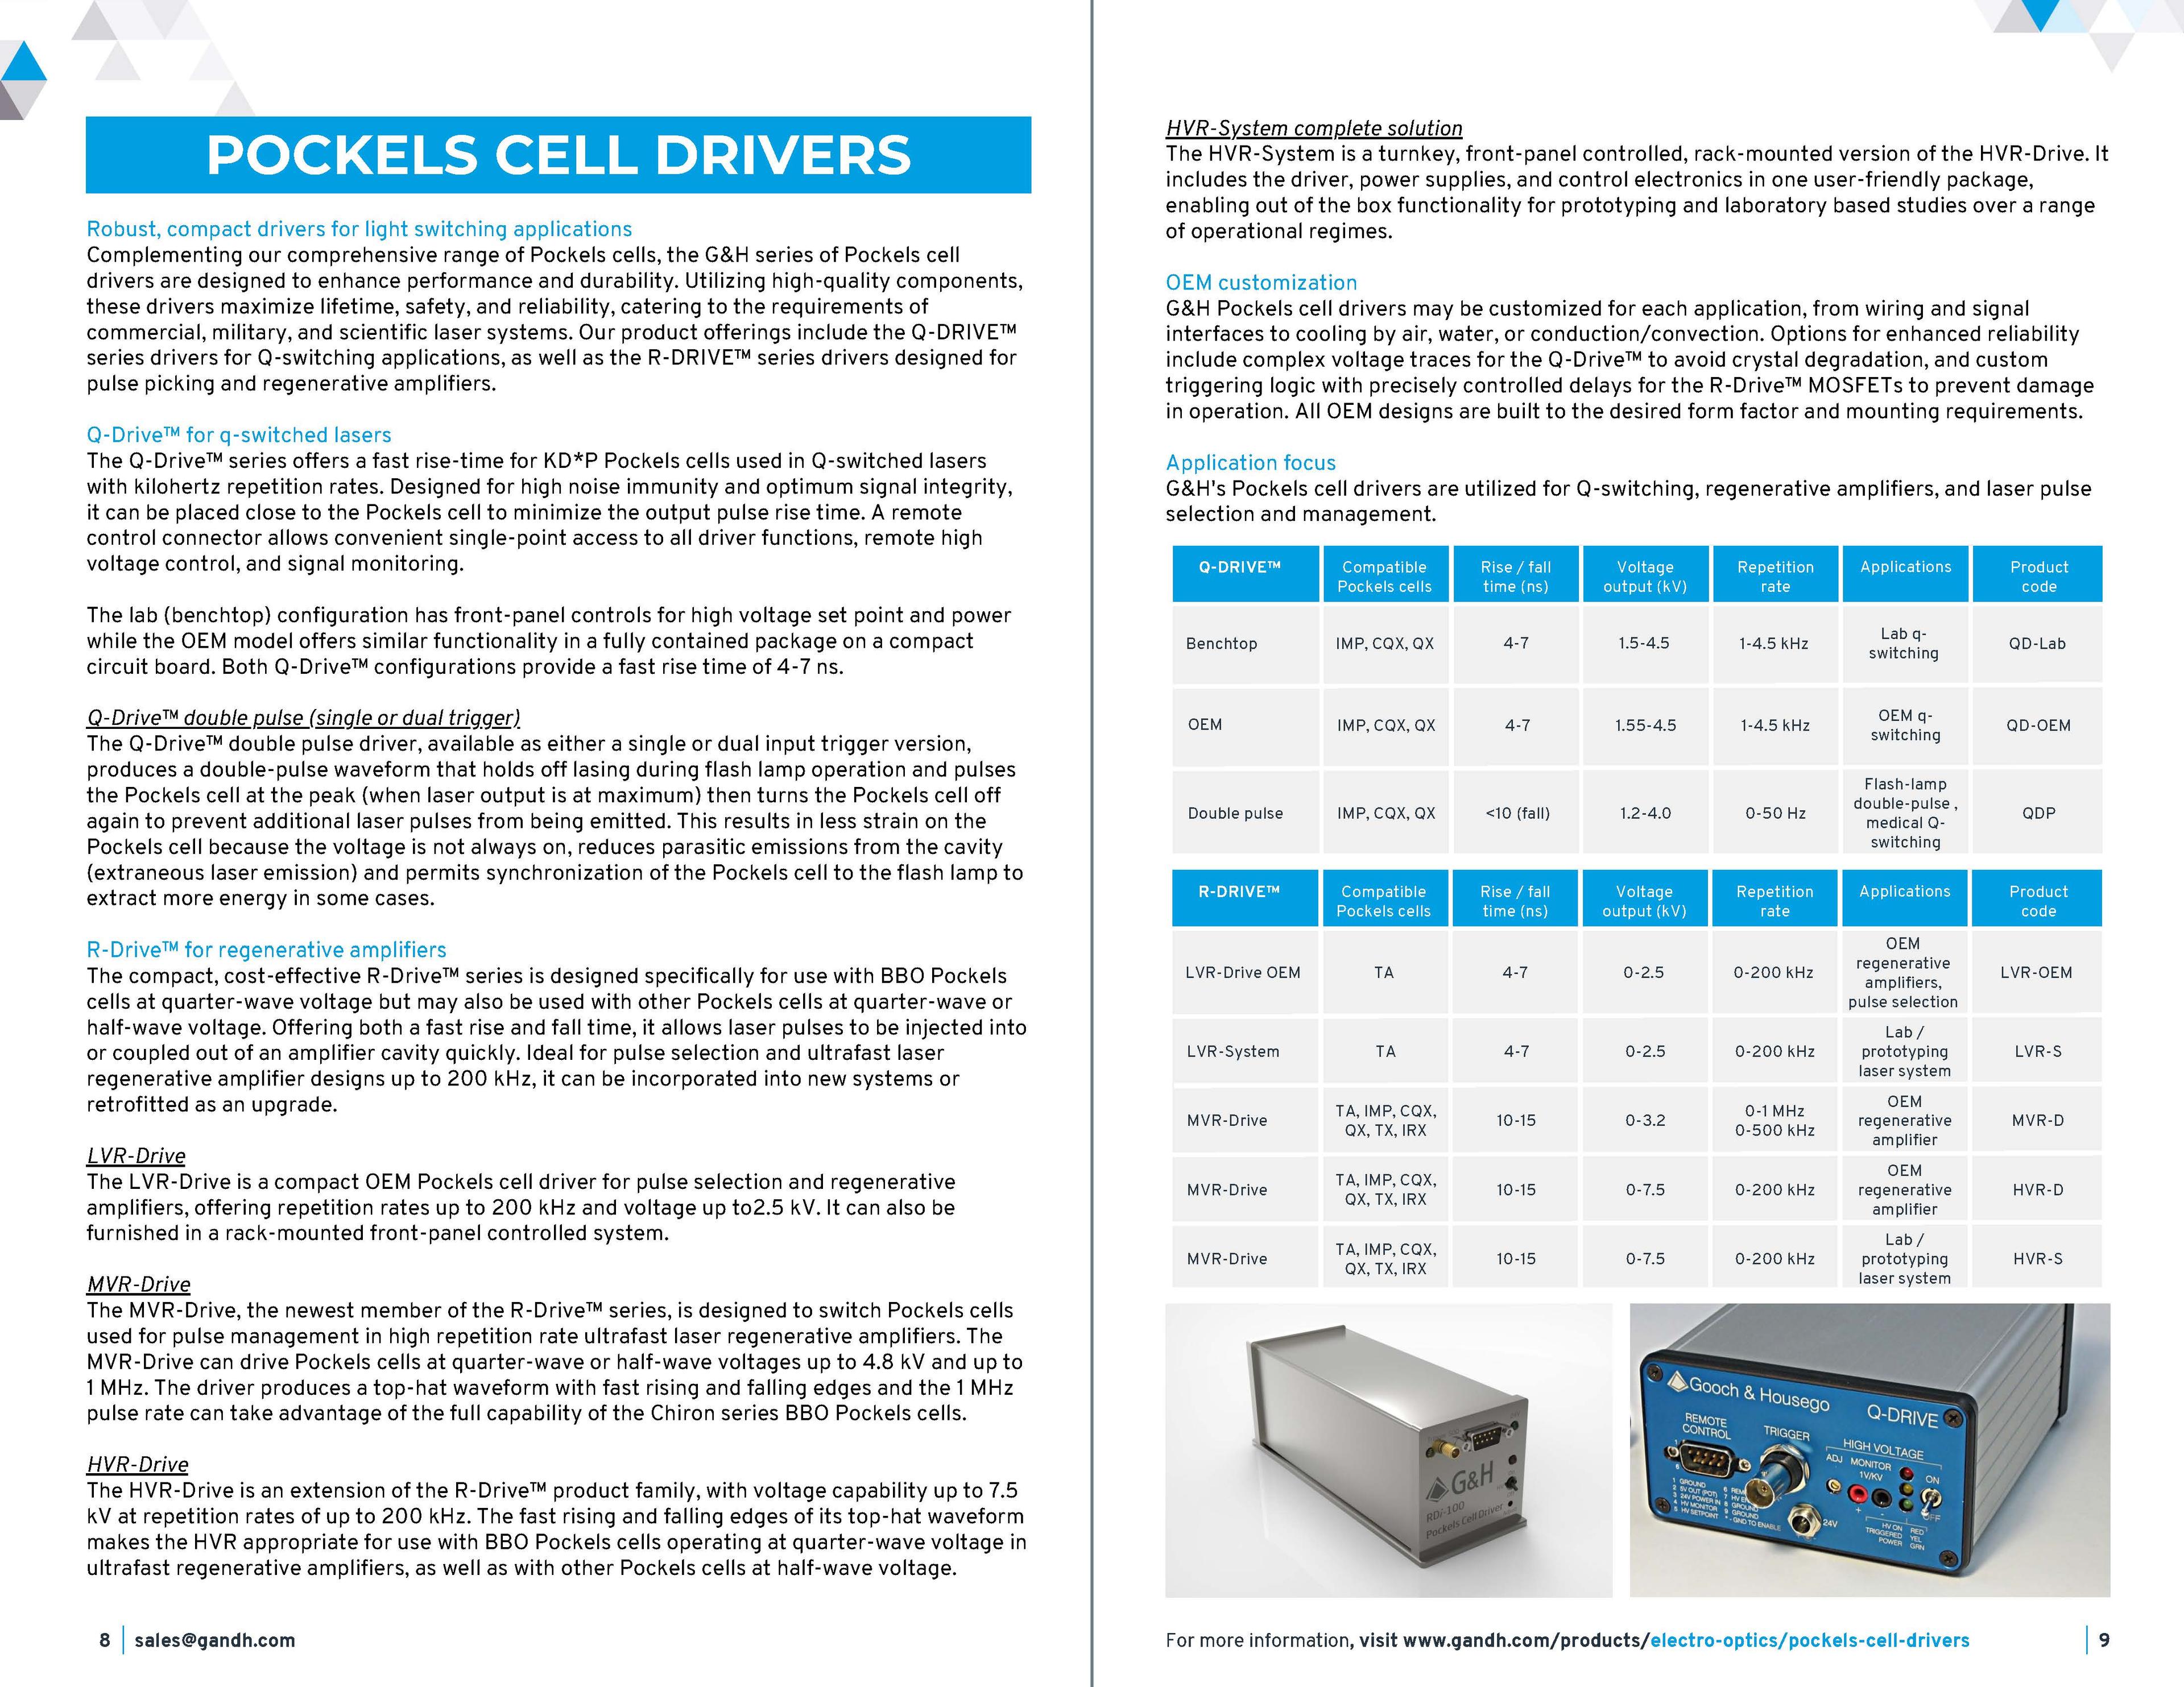 G&H Product & Solutions Guide - Electro-Optics Page 08-09